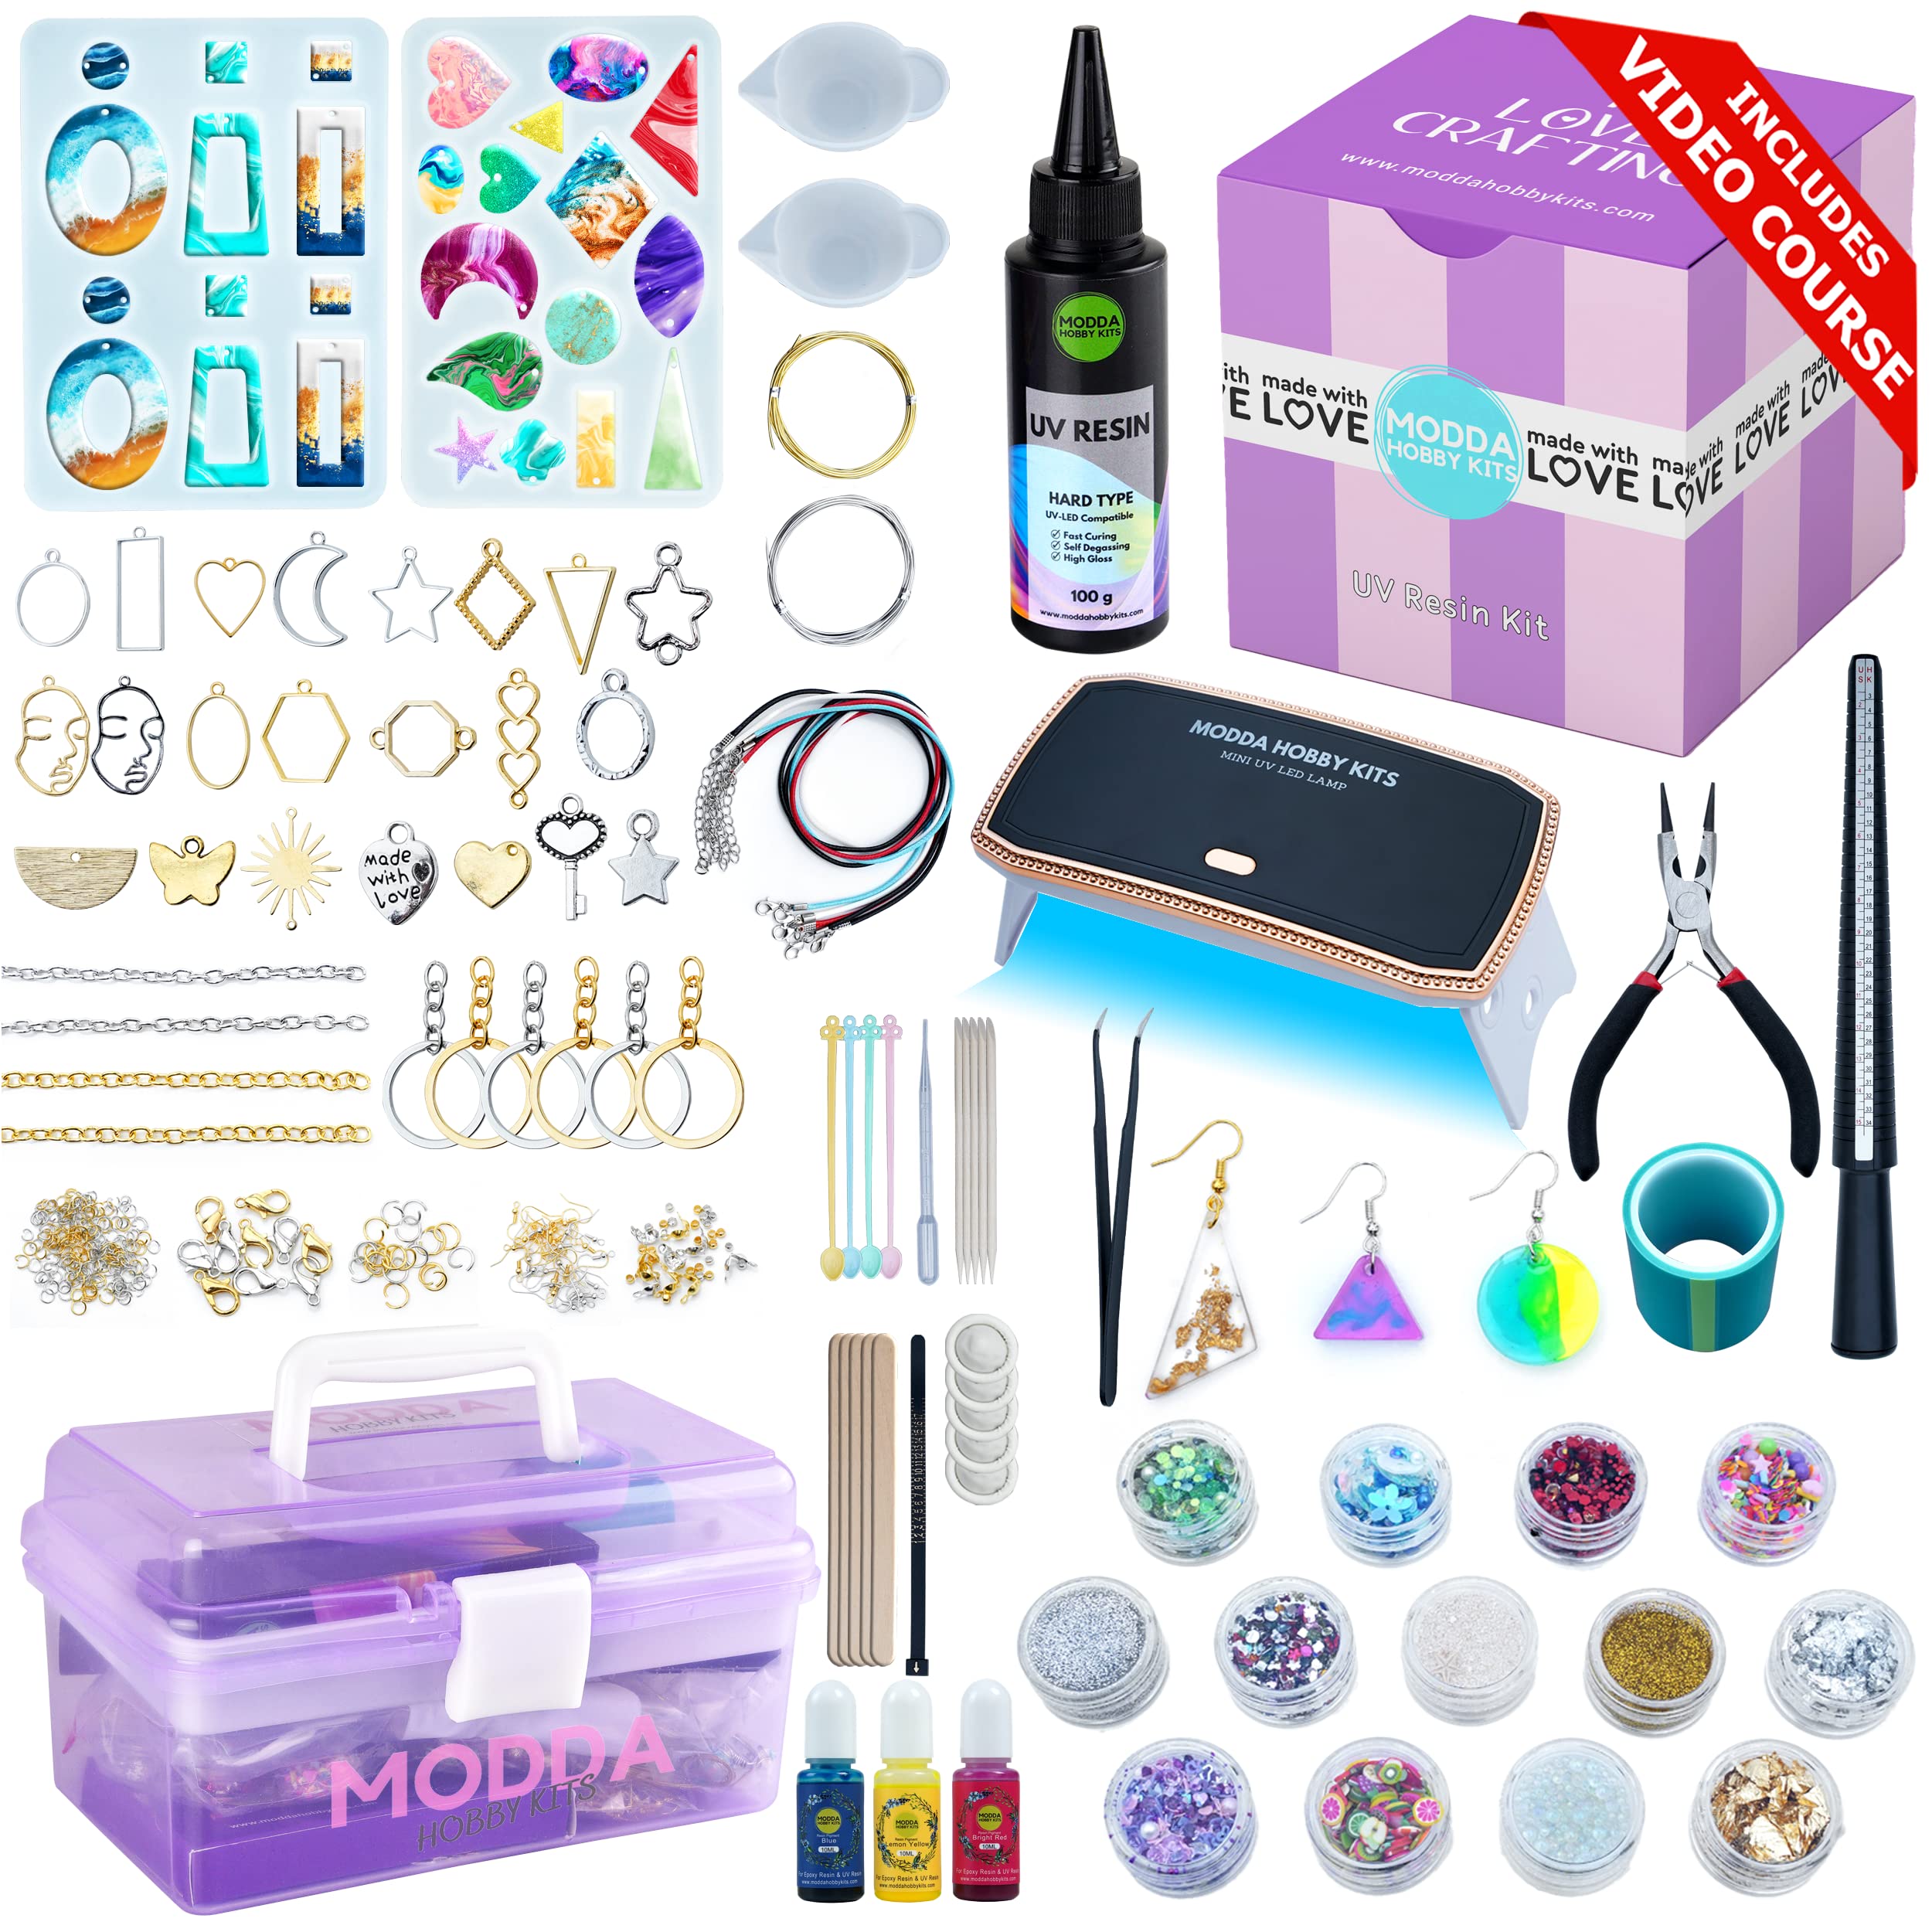 MODDA UV Resin Kit with Light for Beginners with Video Course